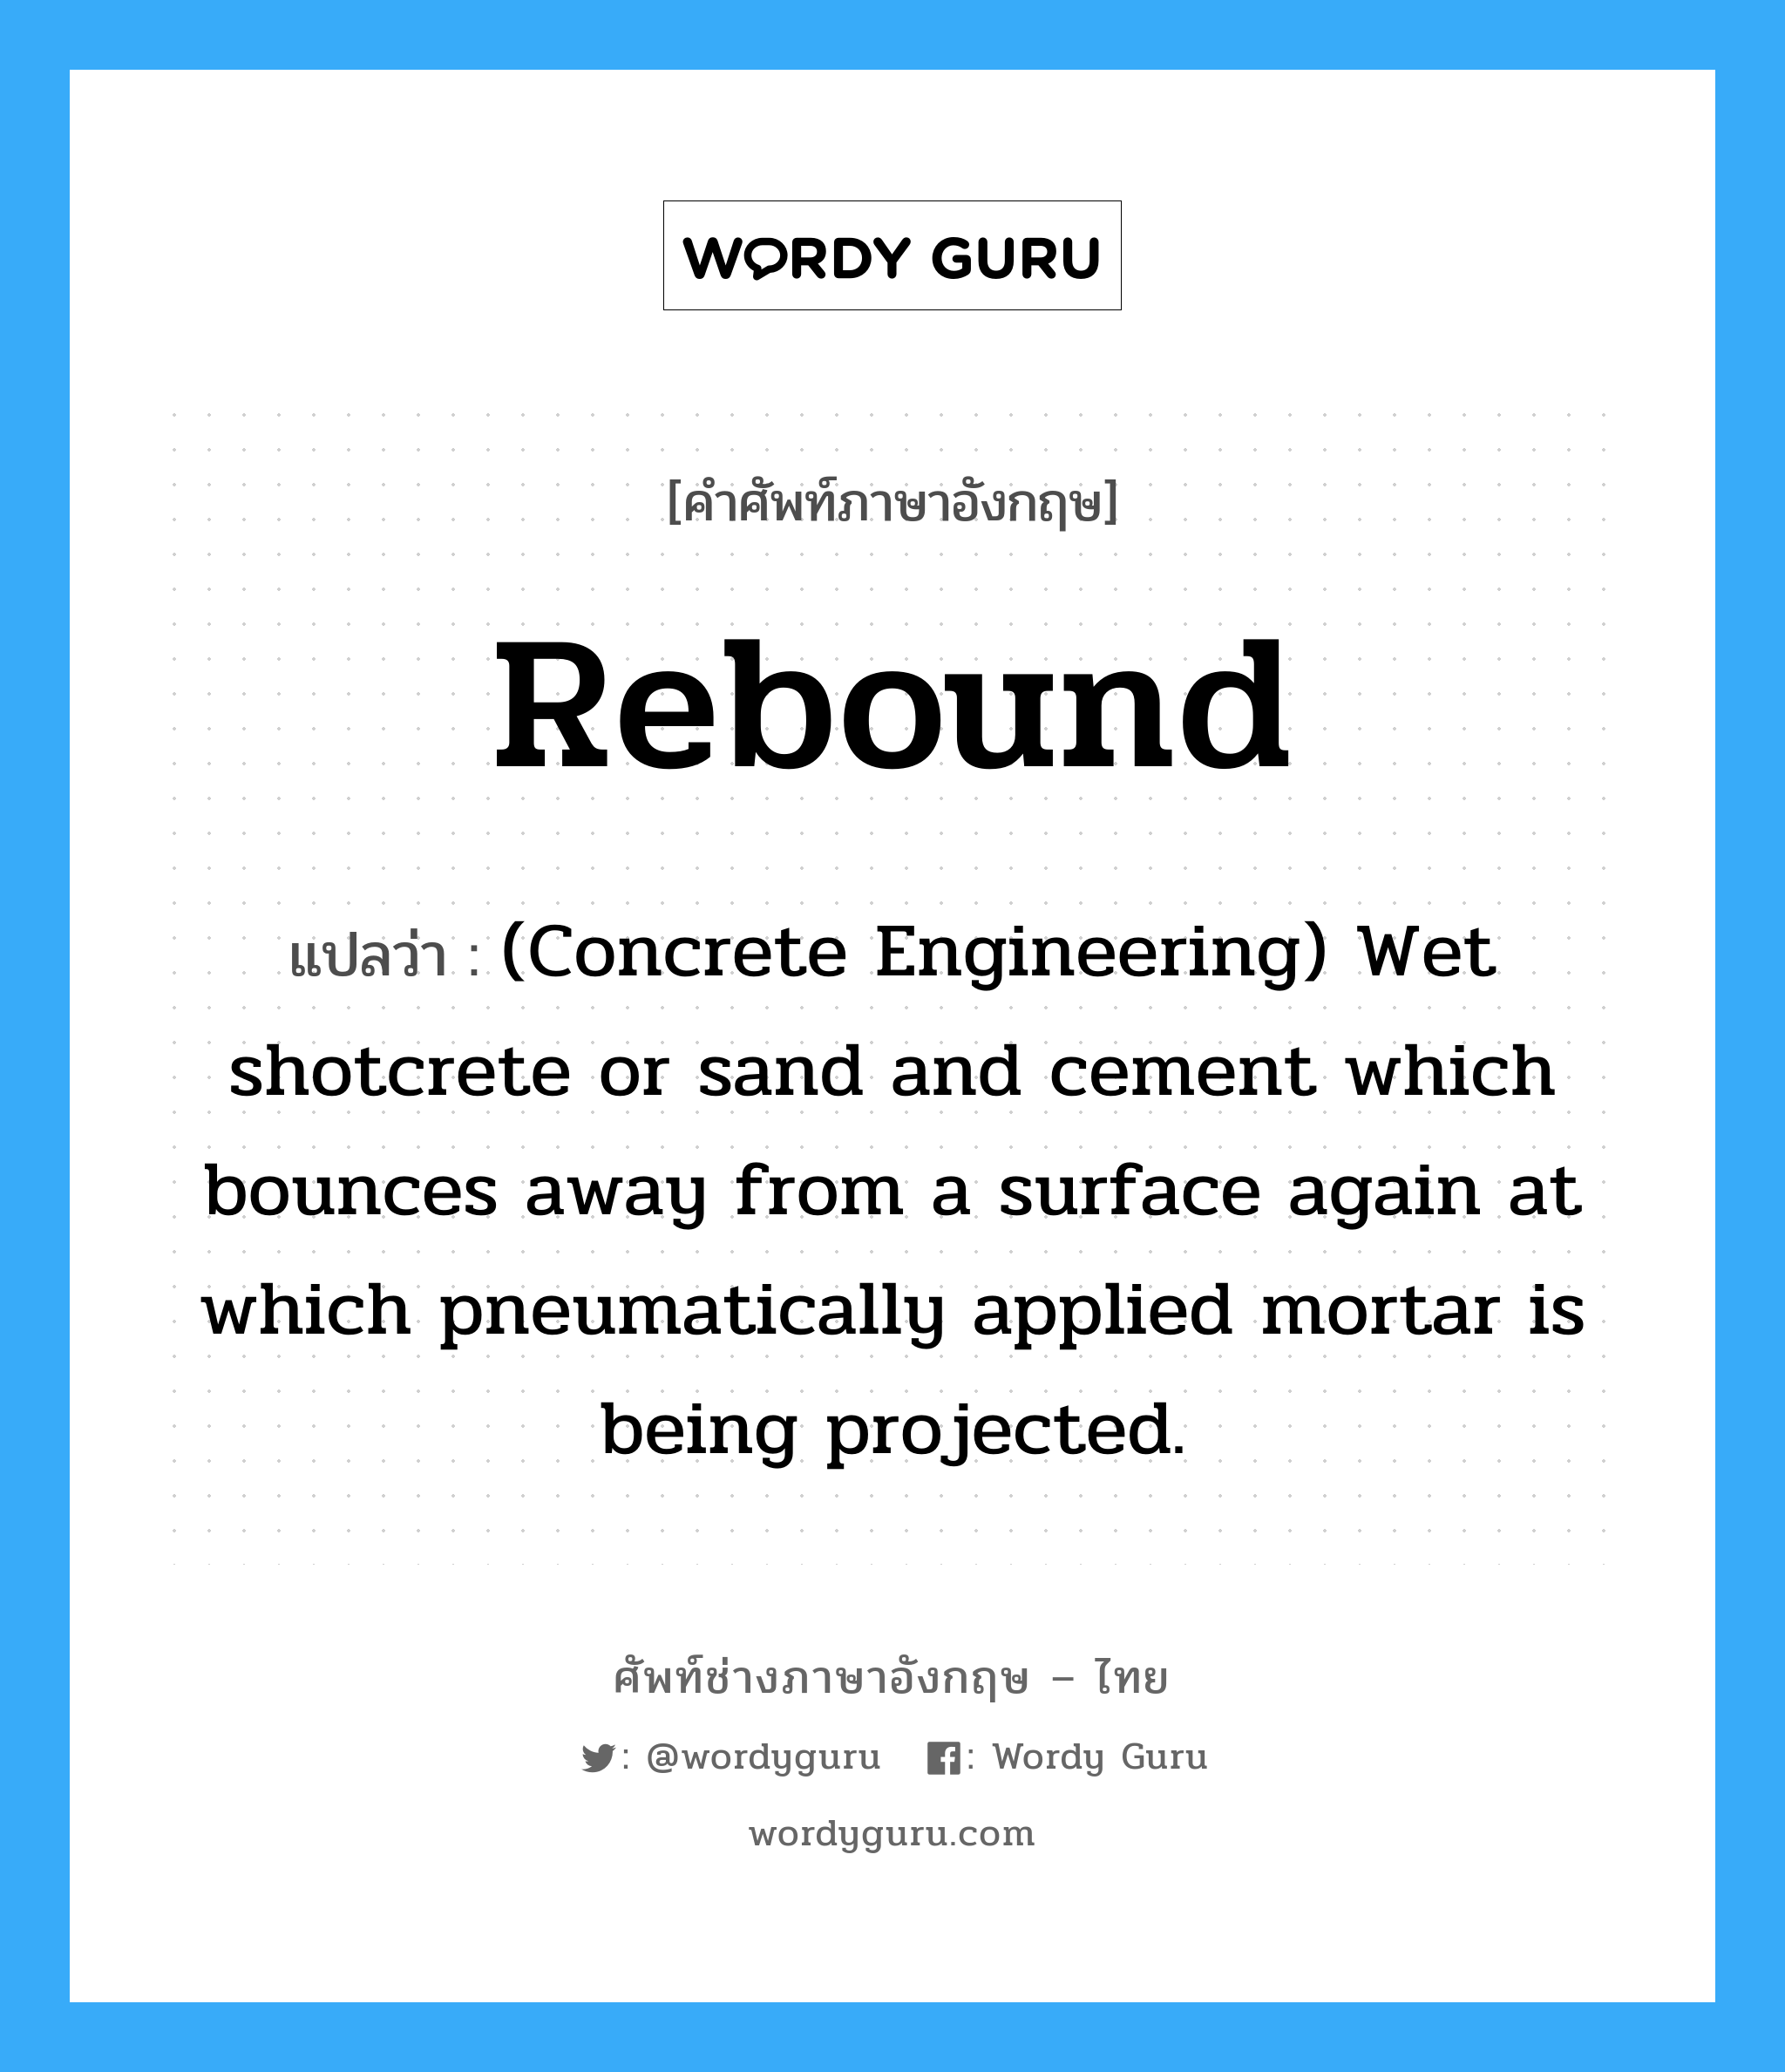 Rebound แปลว่า?, คำศัพท์ช่างภาษาอังกฤษ - ไทย Rebound คำศัพท์ภาษาอังกฤษ Rebound แปลว่า (Concrete Engineering) Wet shotcrete or sand and cement which bounces away from a surface again at which pneumatically applied mortar is being projected.